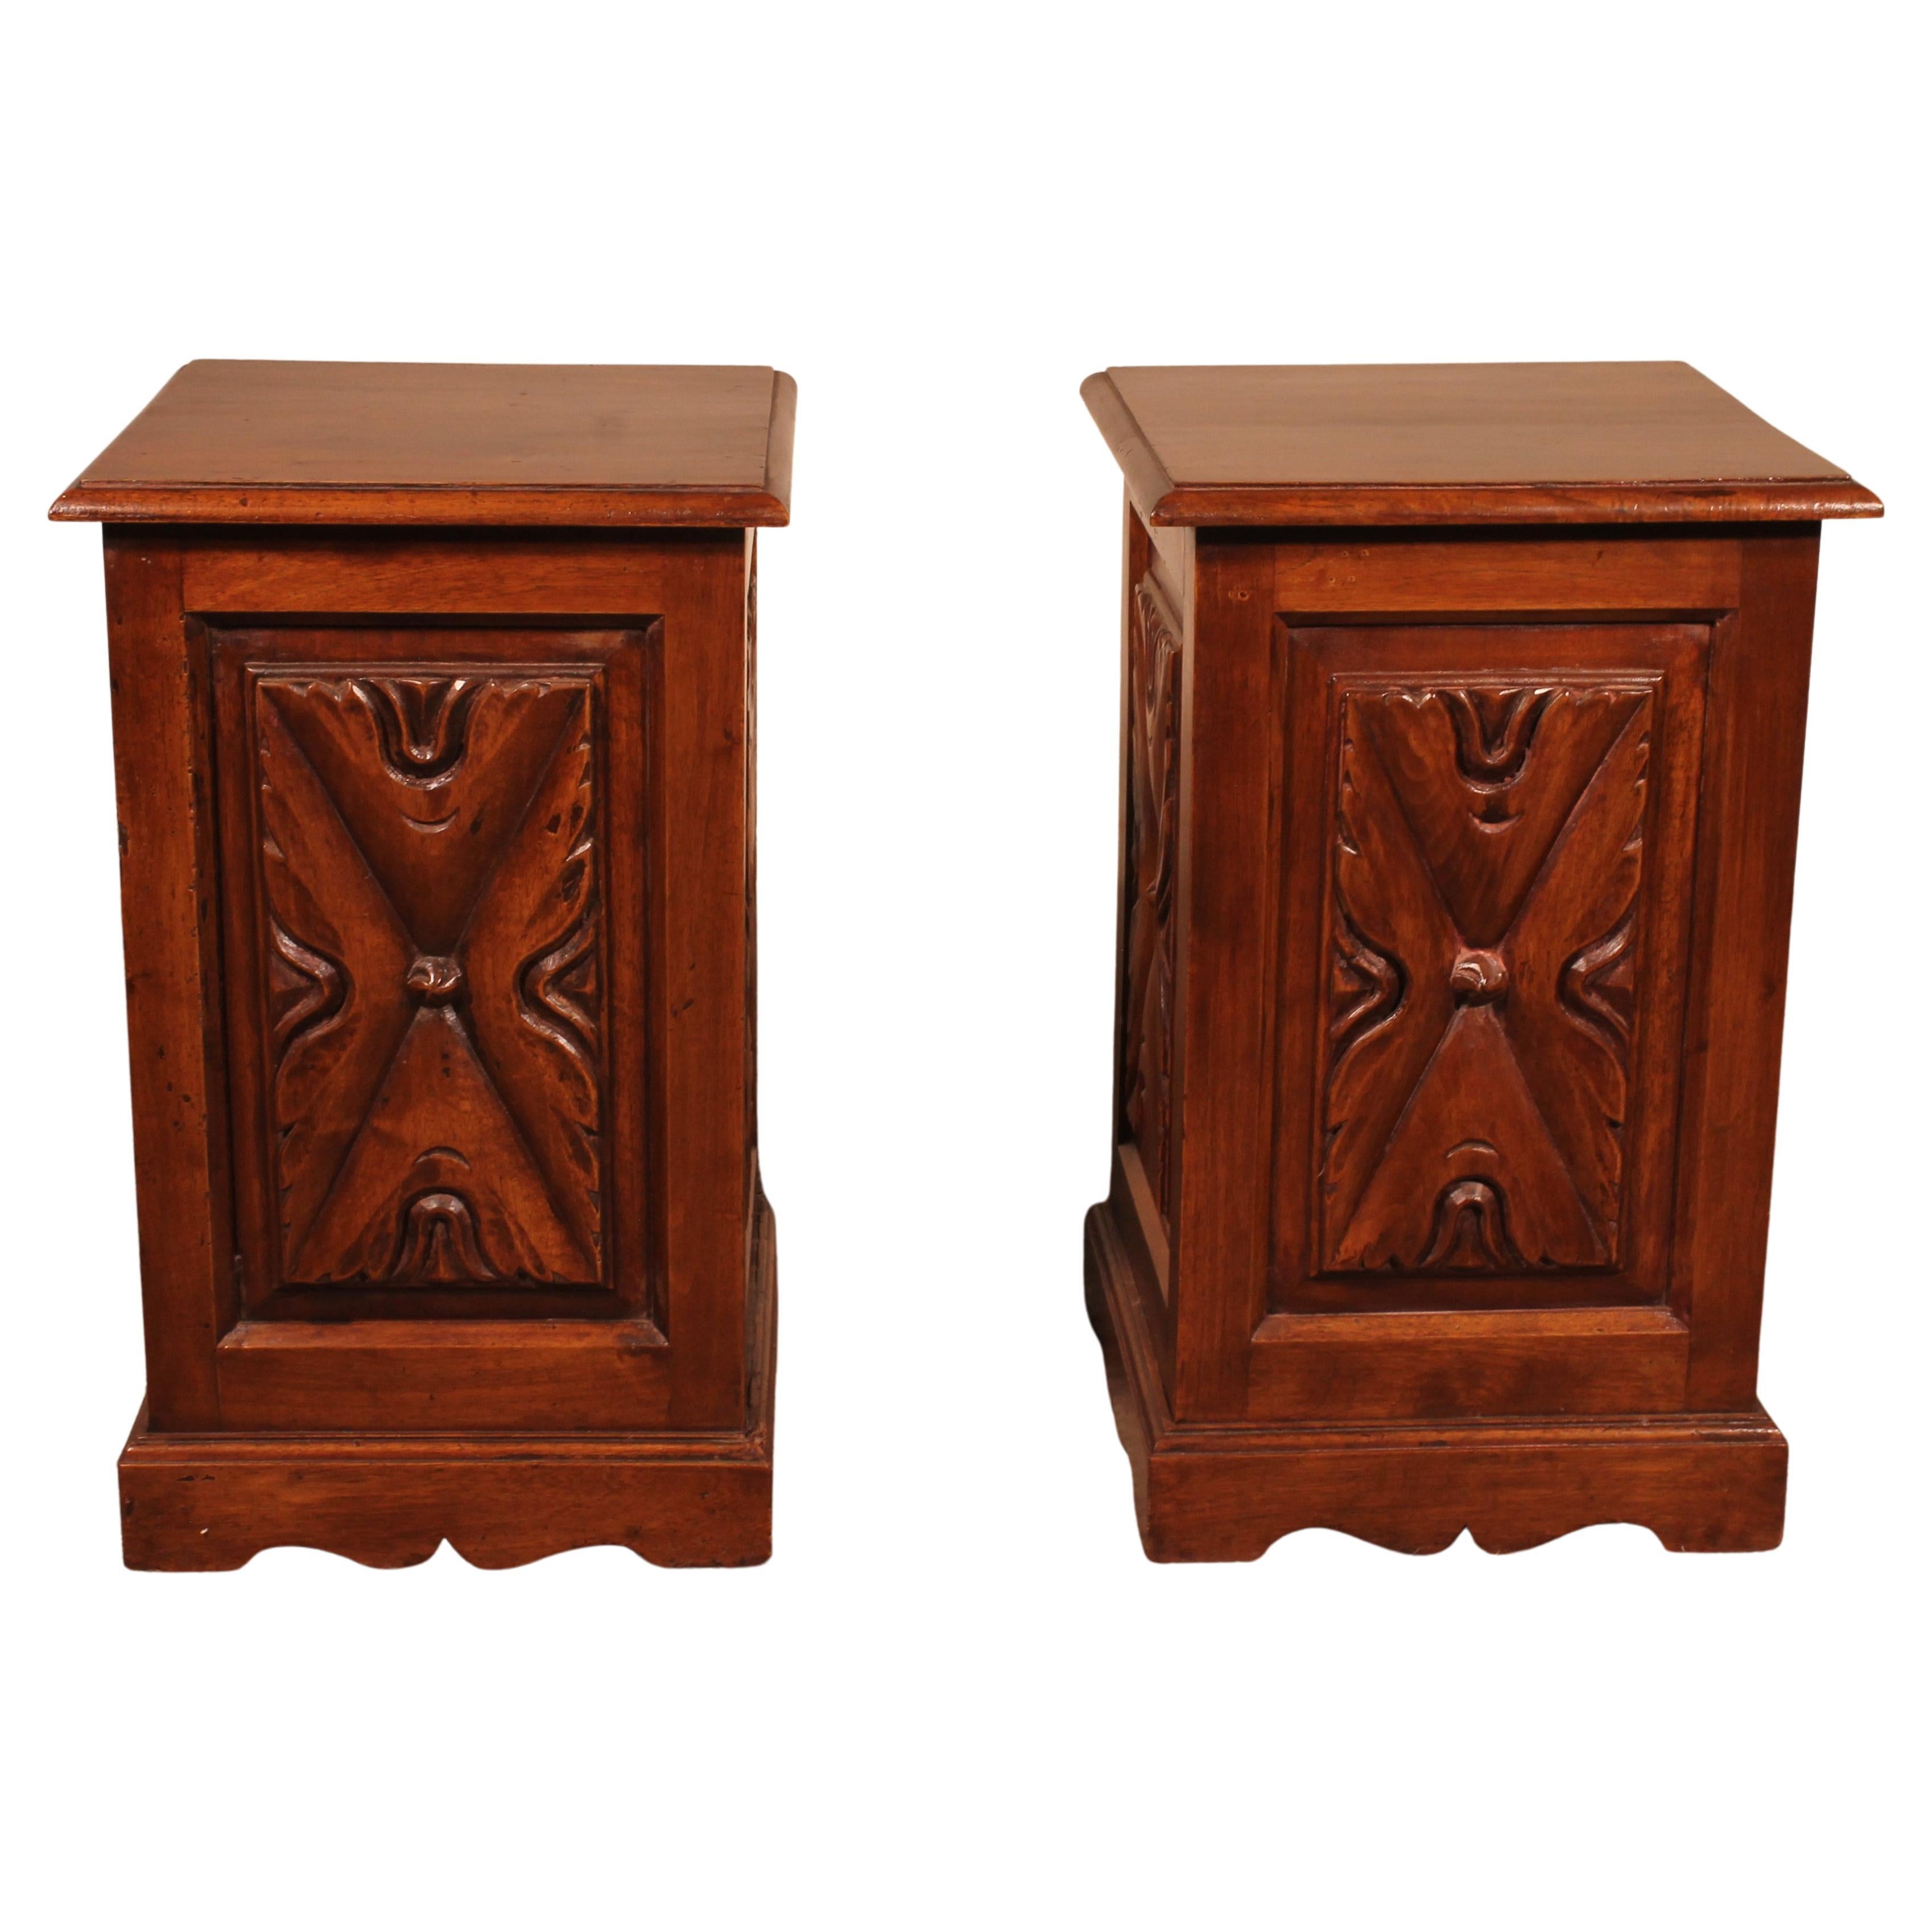 Pair of Pedestal / Bedside Tables in Walnut Spain 19th Century